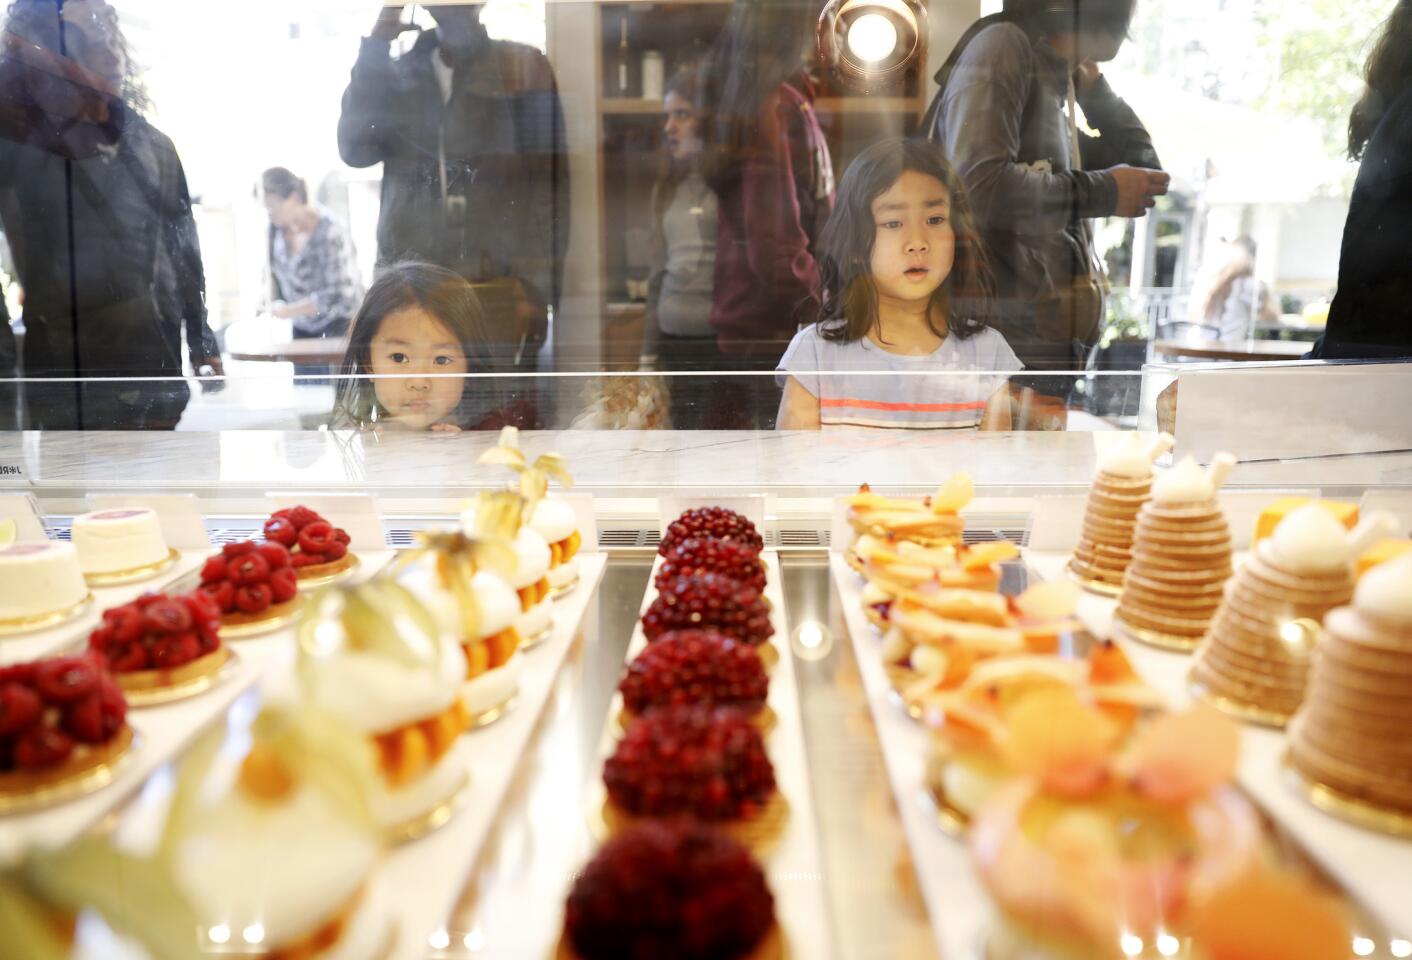 Three-year-old Lydia Sebata, left, and her sister Candice, 5, right, peer into the glass case at Dominique Ansel Bakery at the Grove in Los Angeles.